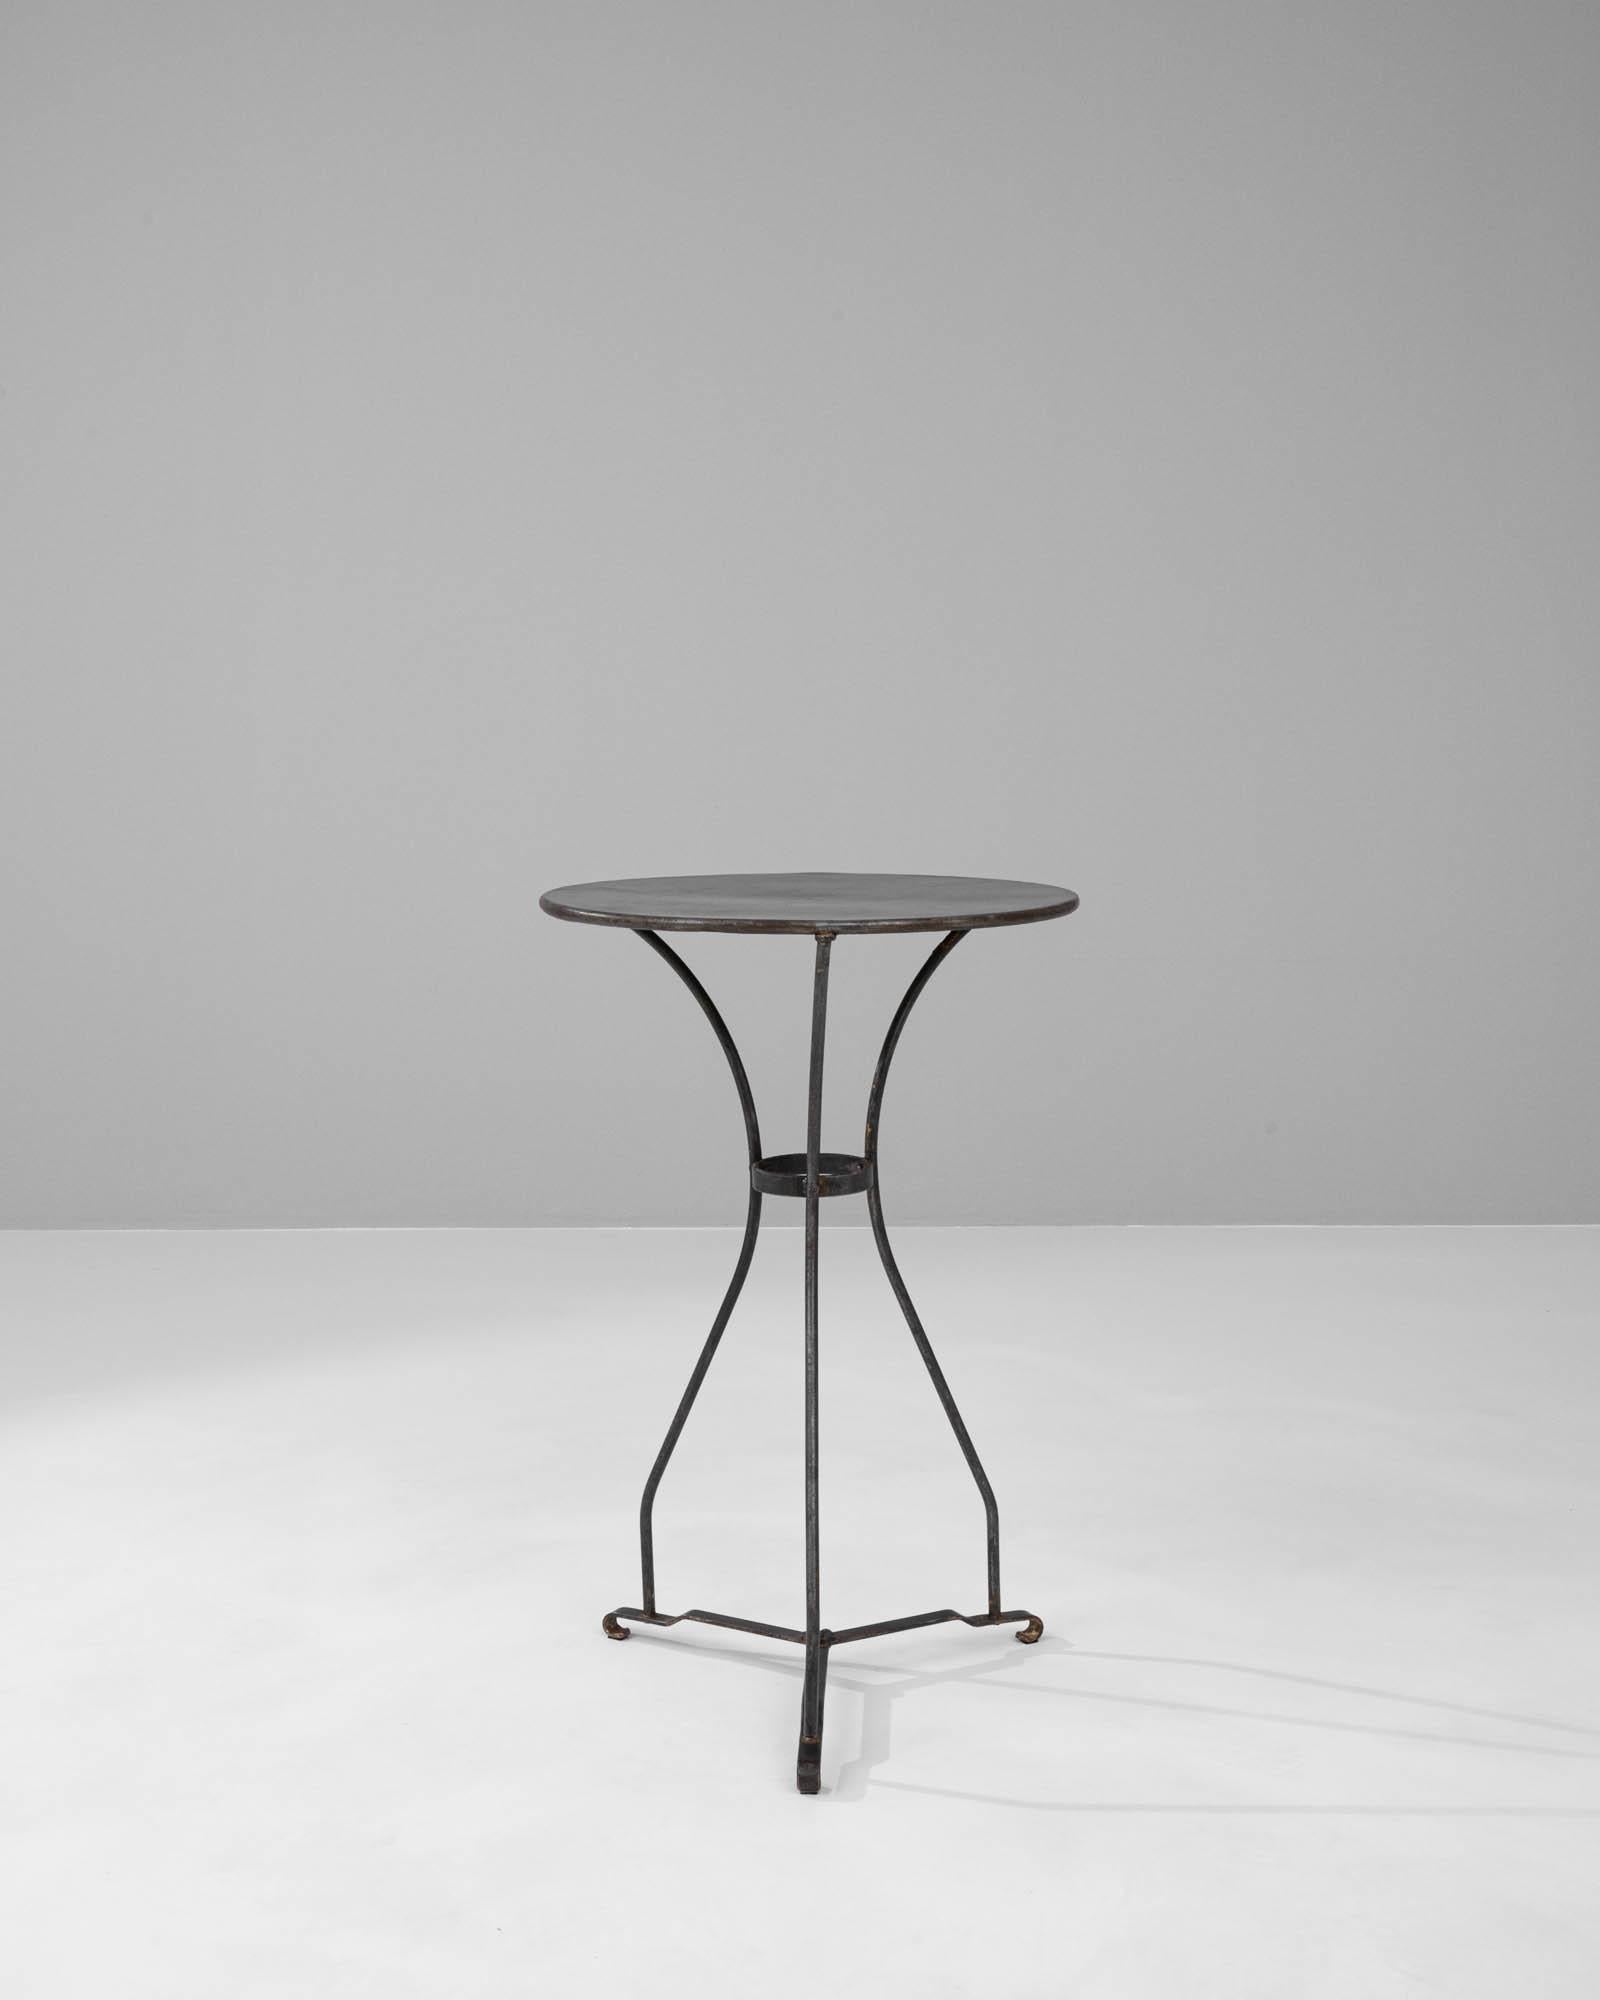 This early 1900s French metal side table is a charming artifact that carries the essence of Parisian chic and the solidity of industrial craftsmanship. Its slender, curved legs gently splay outwards, meeting the ground with delicate yet sturdy feet,